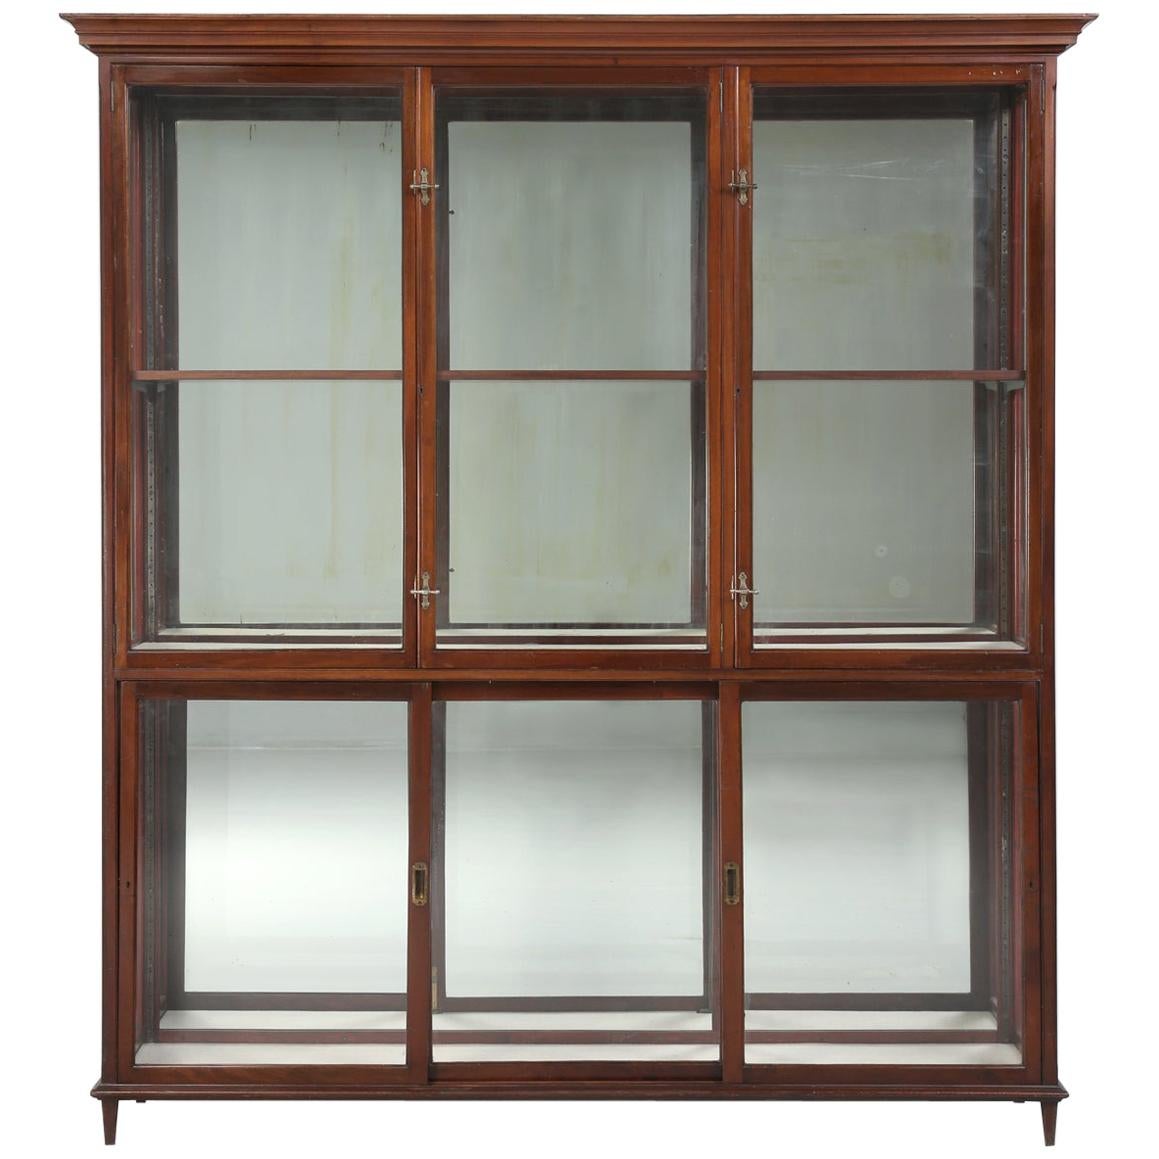 Antique English Mahogany Display or Curio Cabinet, from a Luxury Store